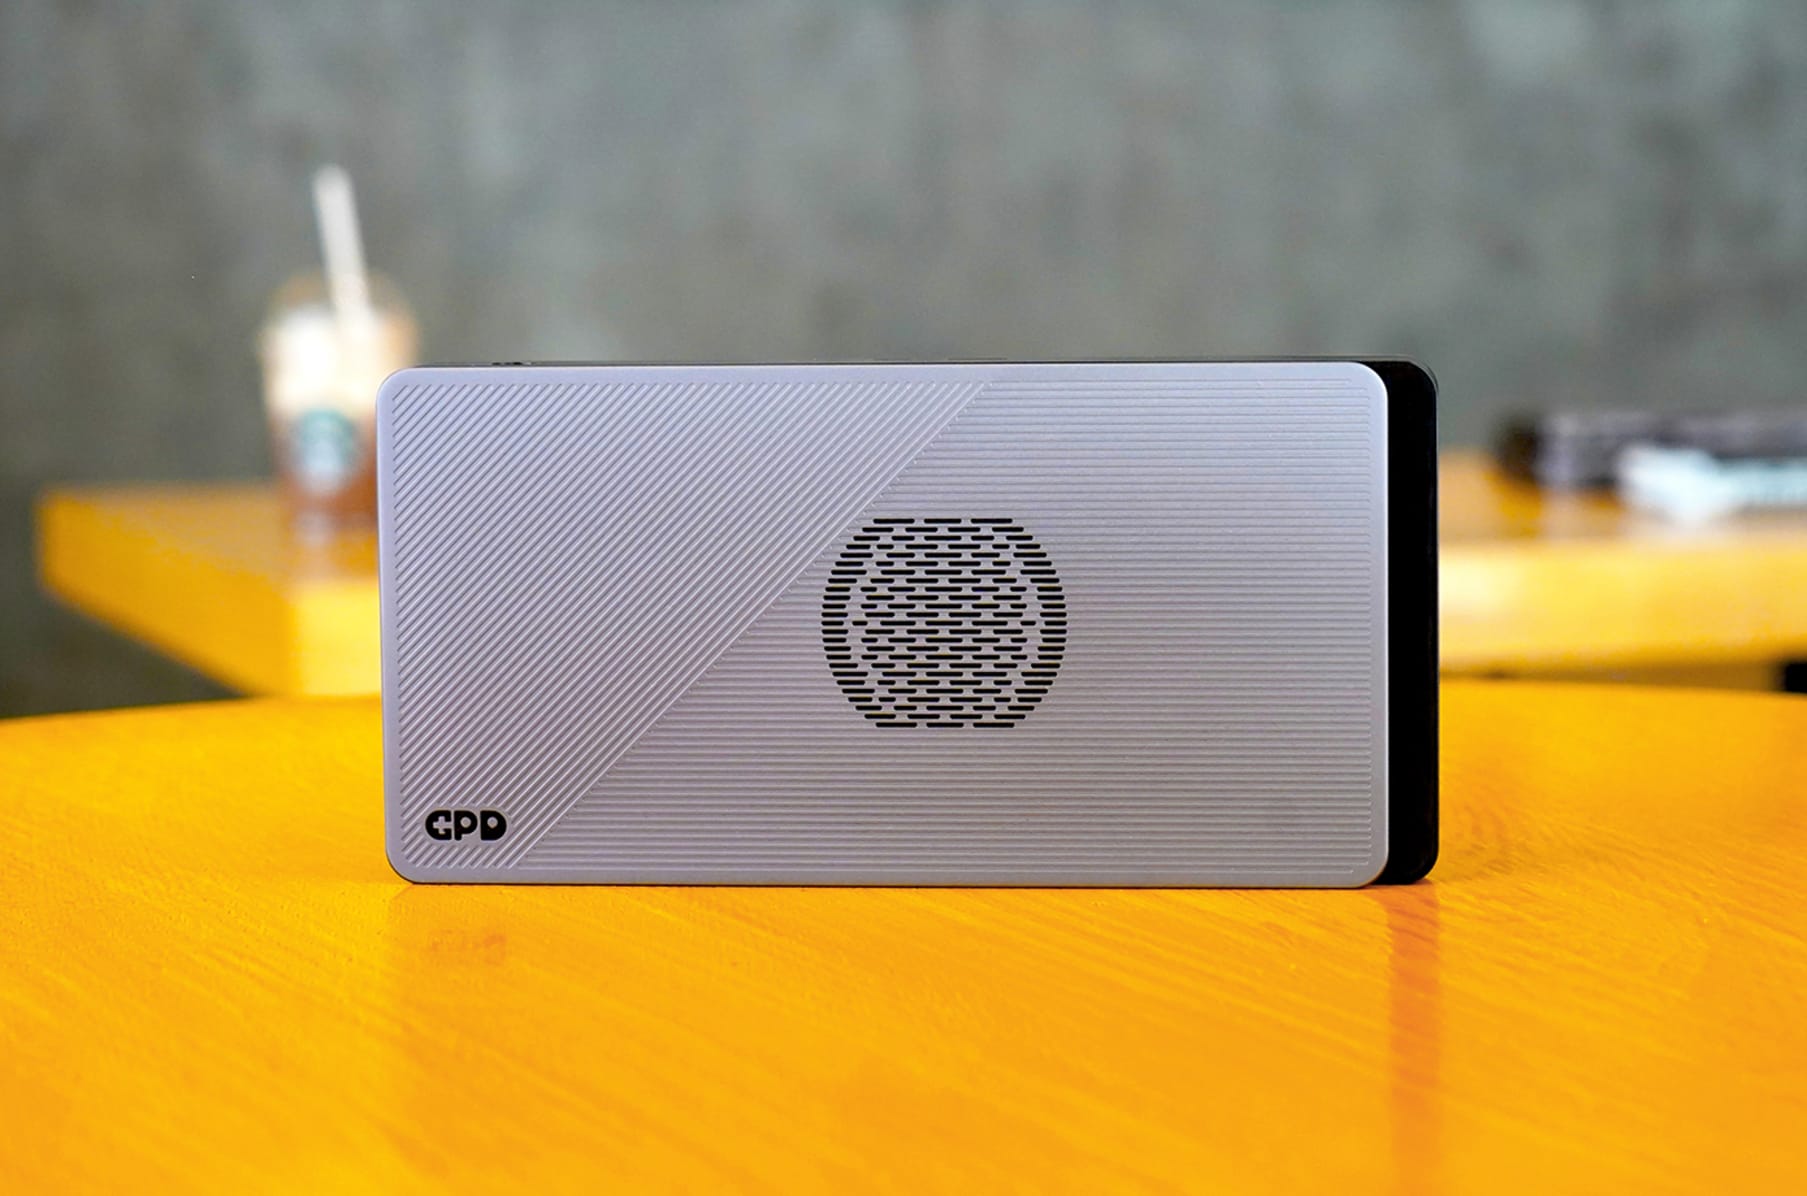 GPD is crowdfunding an eGPU docking station for the cool new